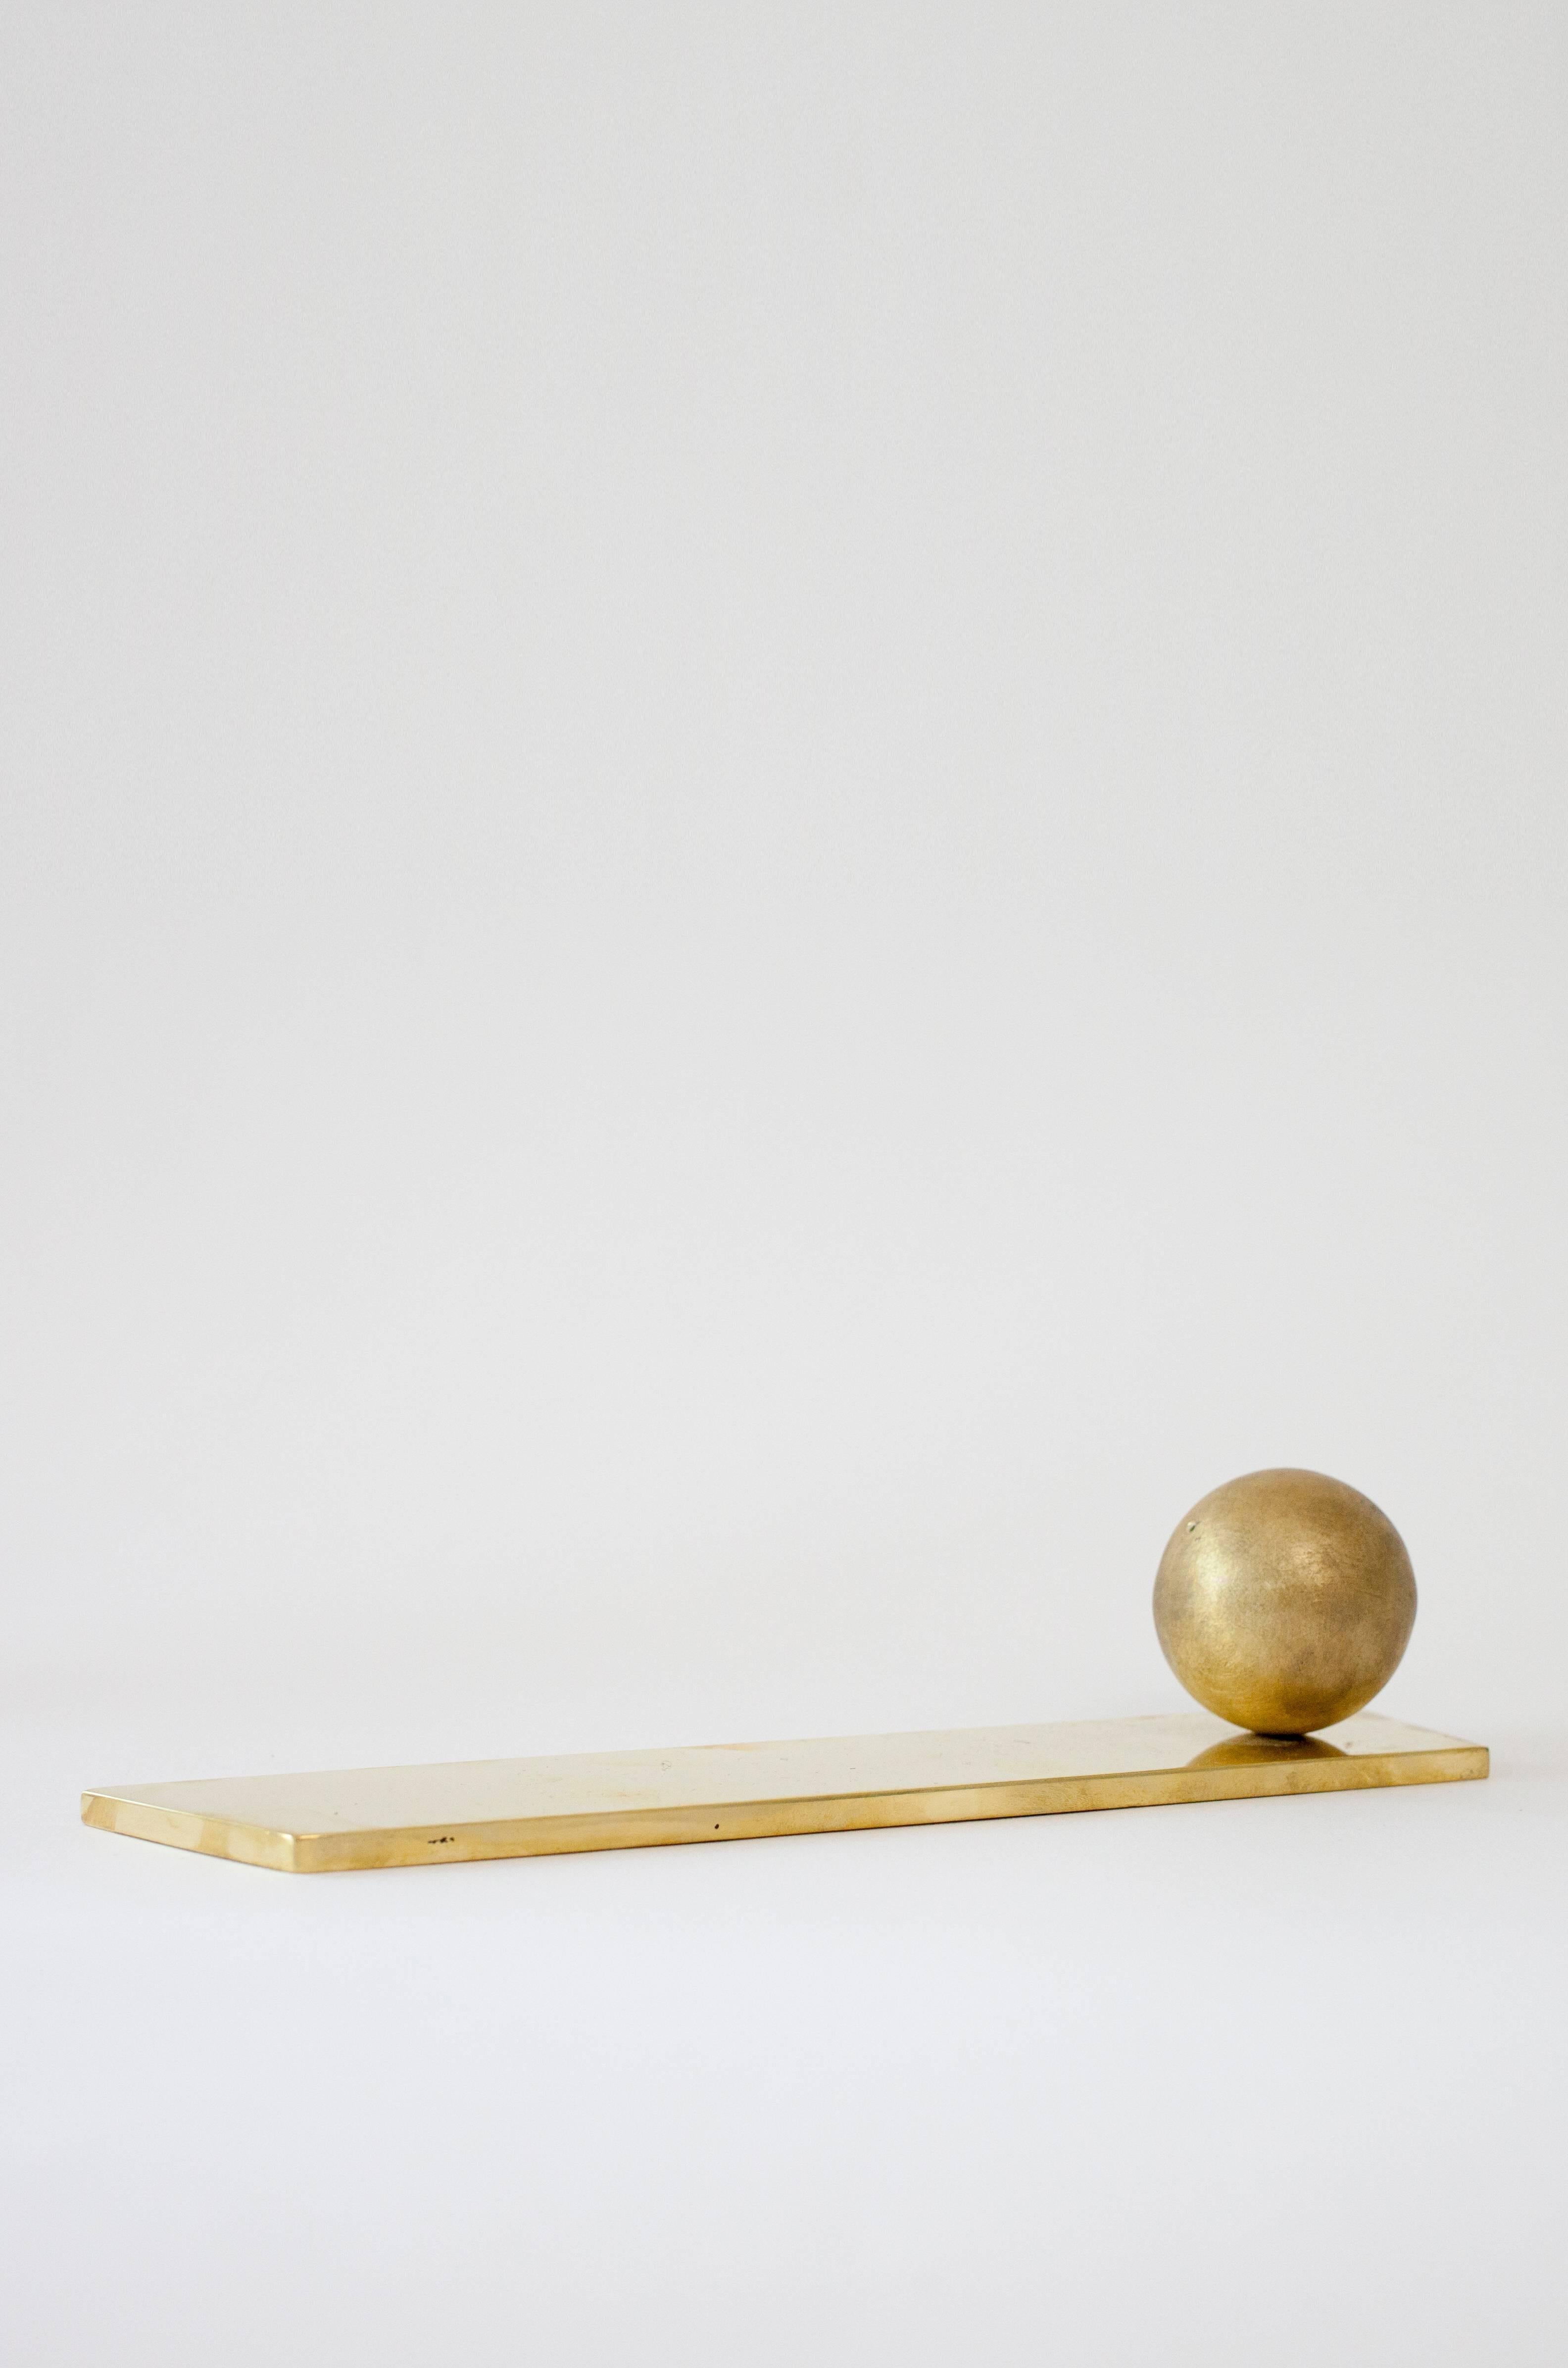 This contemporary rest for incense or sage made of brushed brass is part of the Orphan Work brand and can be used as an table top object. 

ORPHAN WORK is a new identity for lost designs from Material Lust’s own archive. These act as basics - almost